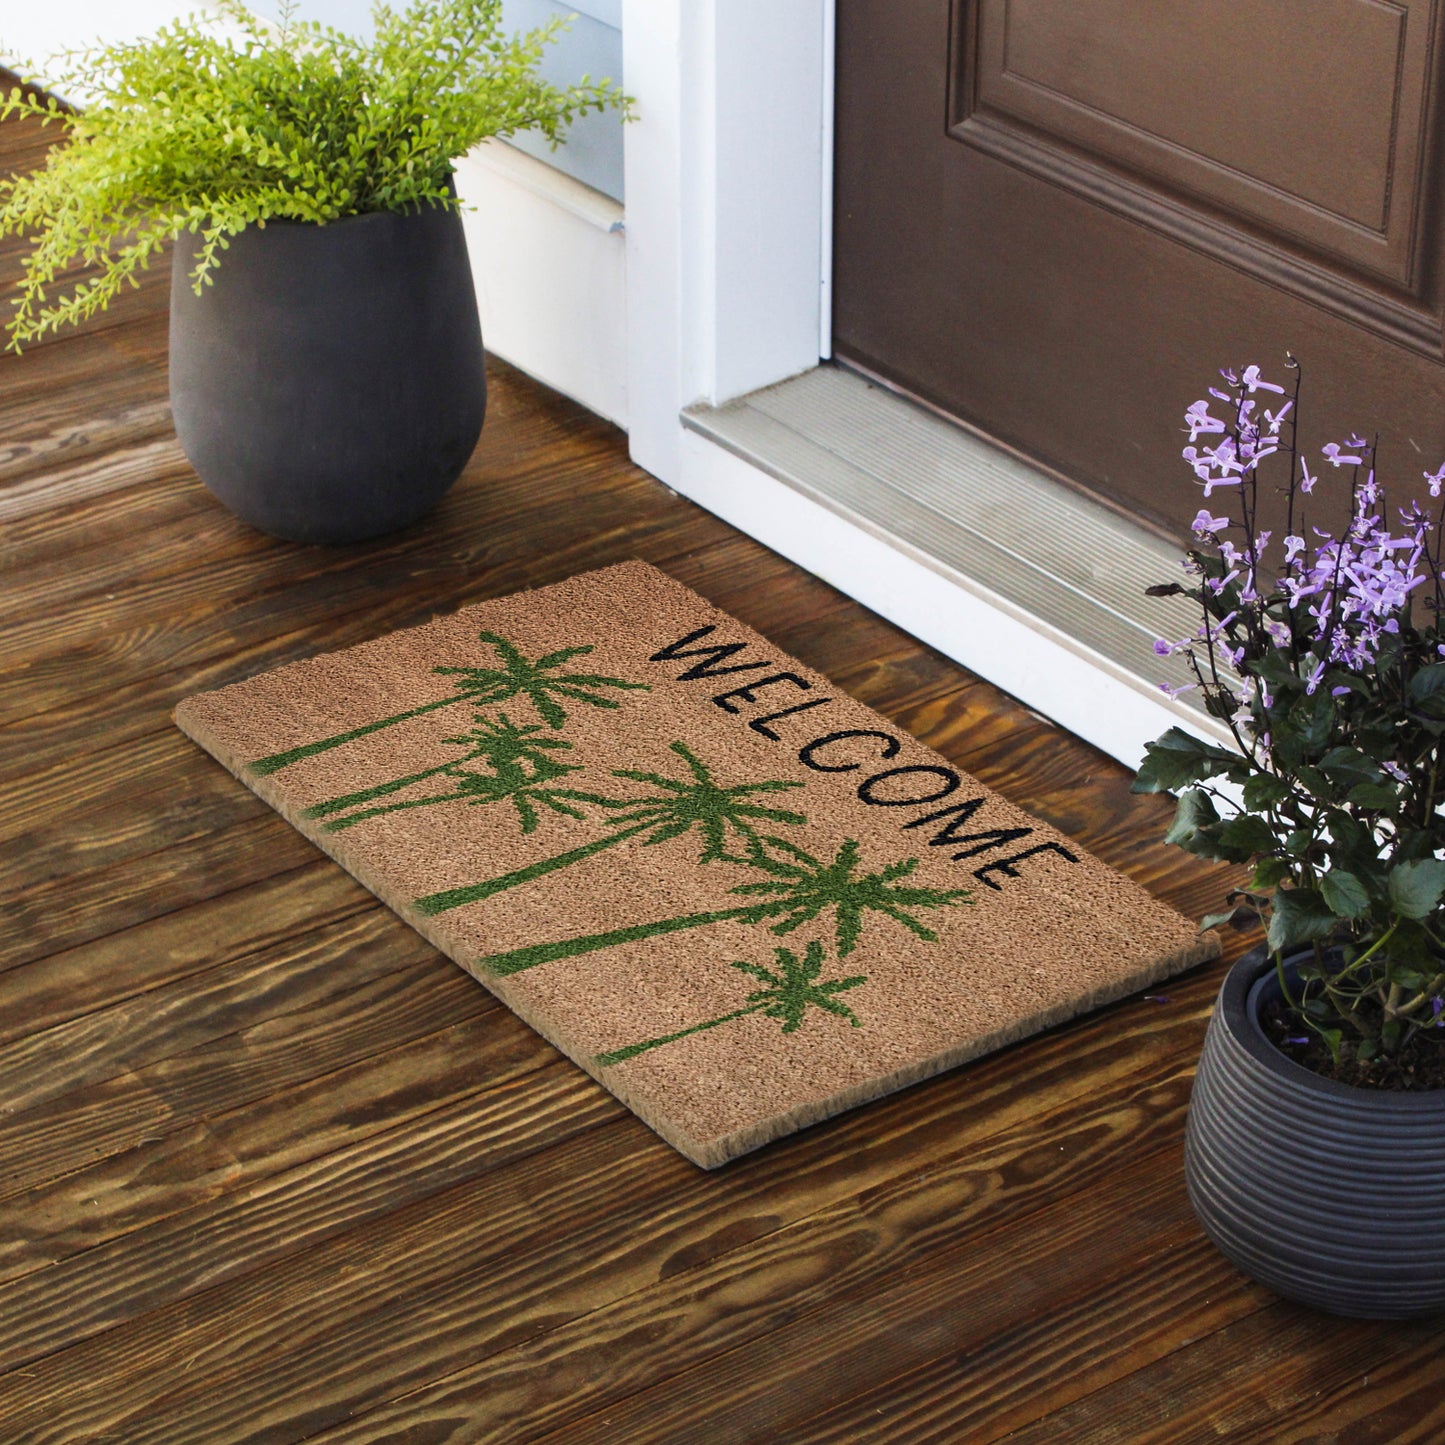 Avera Products "Welcome" Palm Trees Coir Doormat